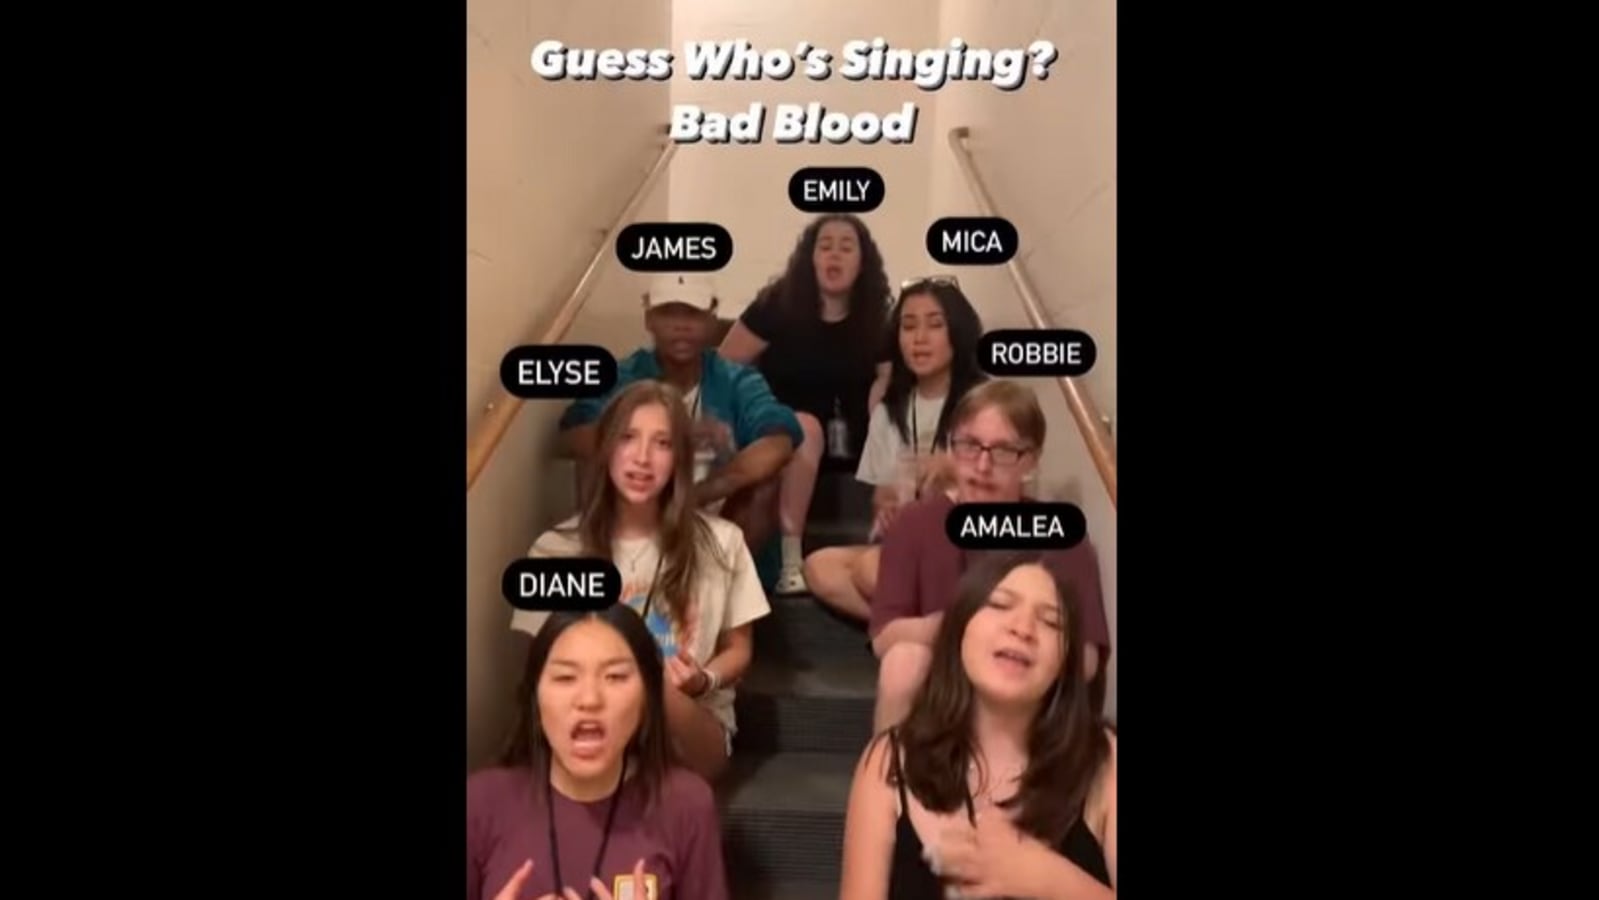 video-shows-one-person-singing-and-others-lip-syncing-can-you-guess-the-singer